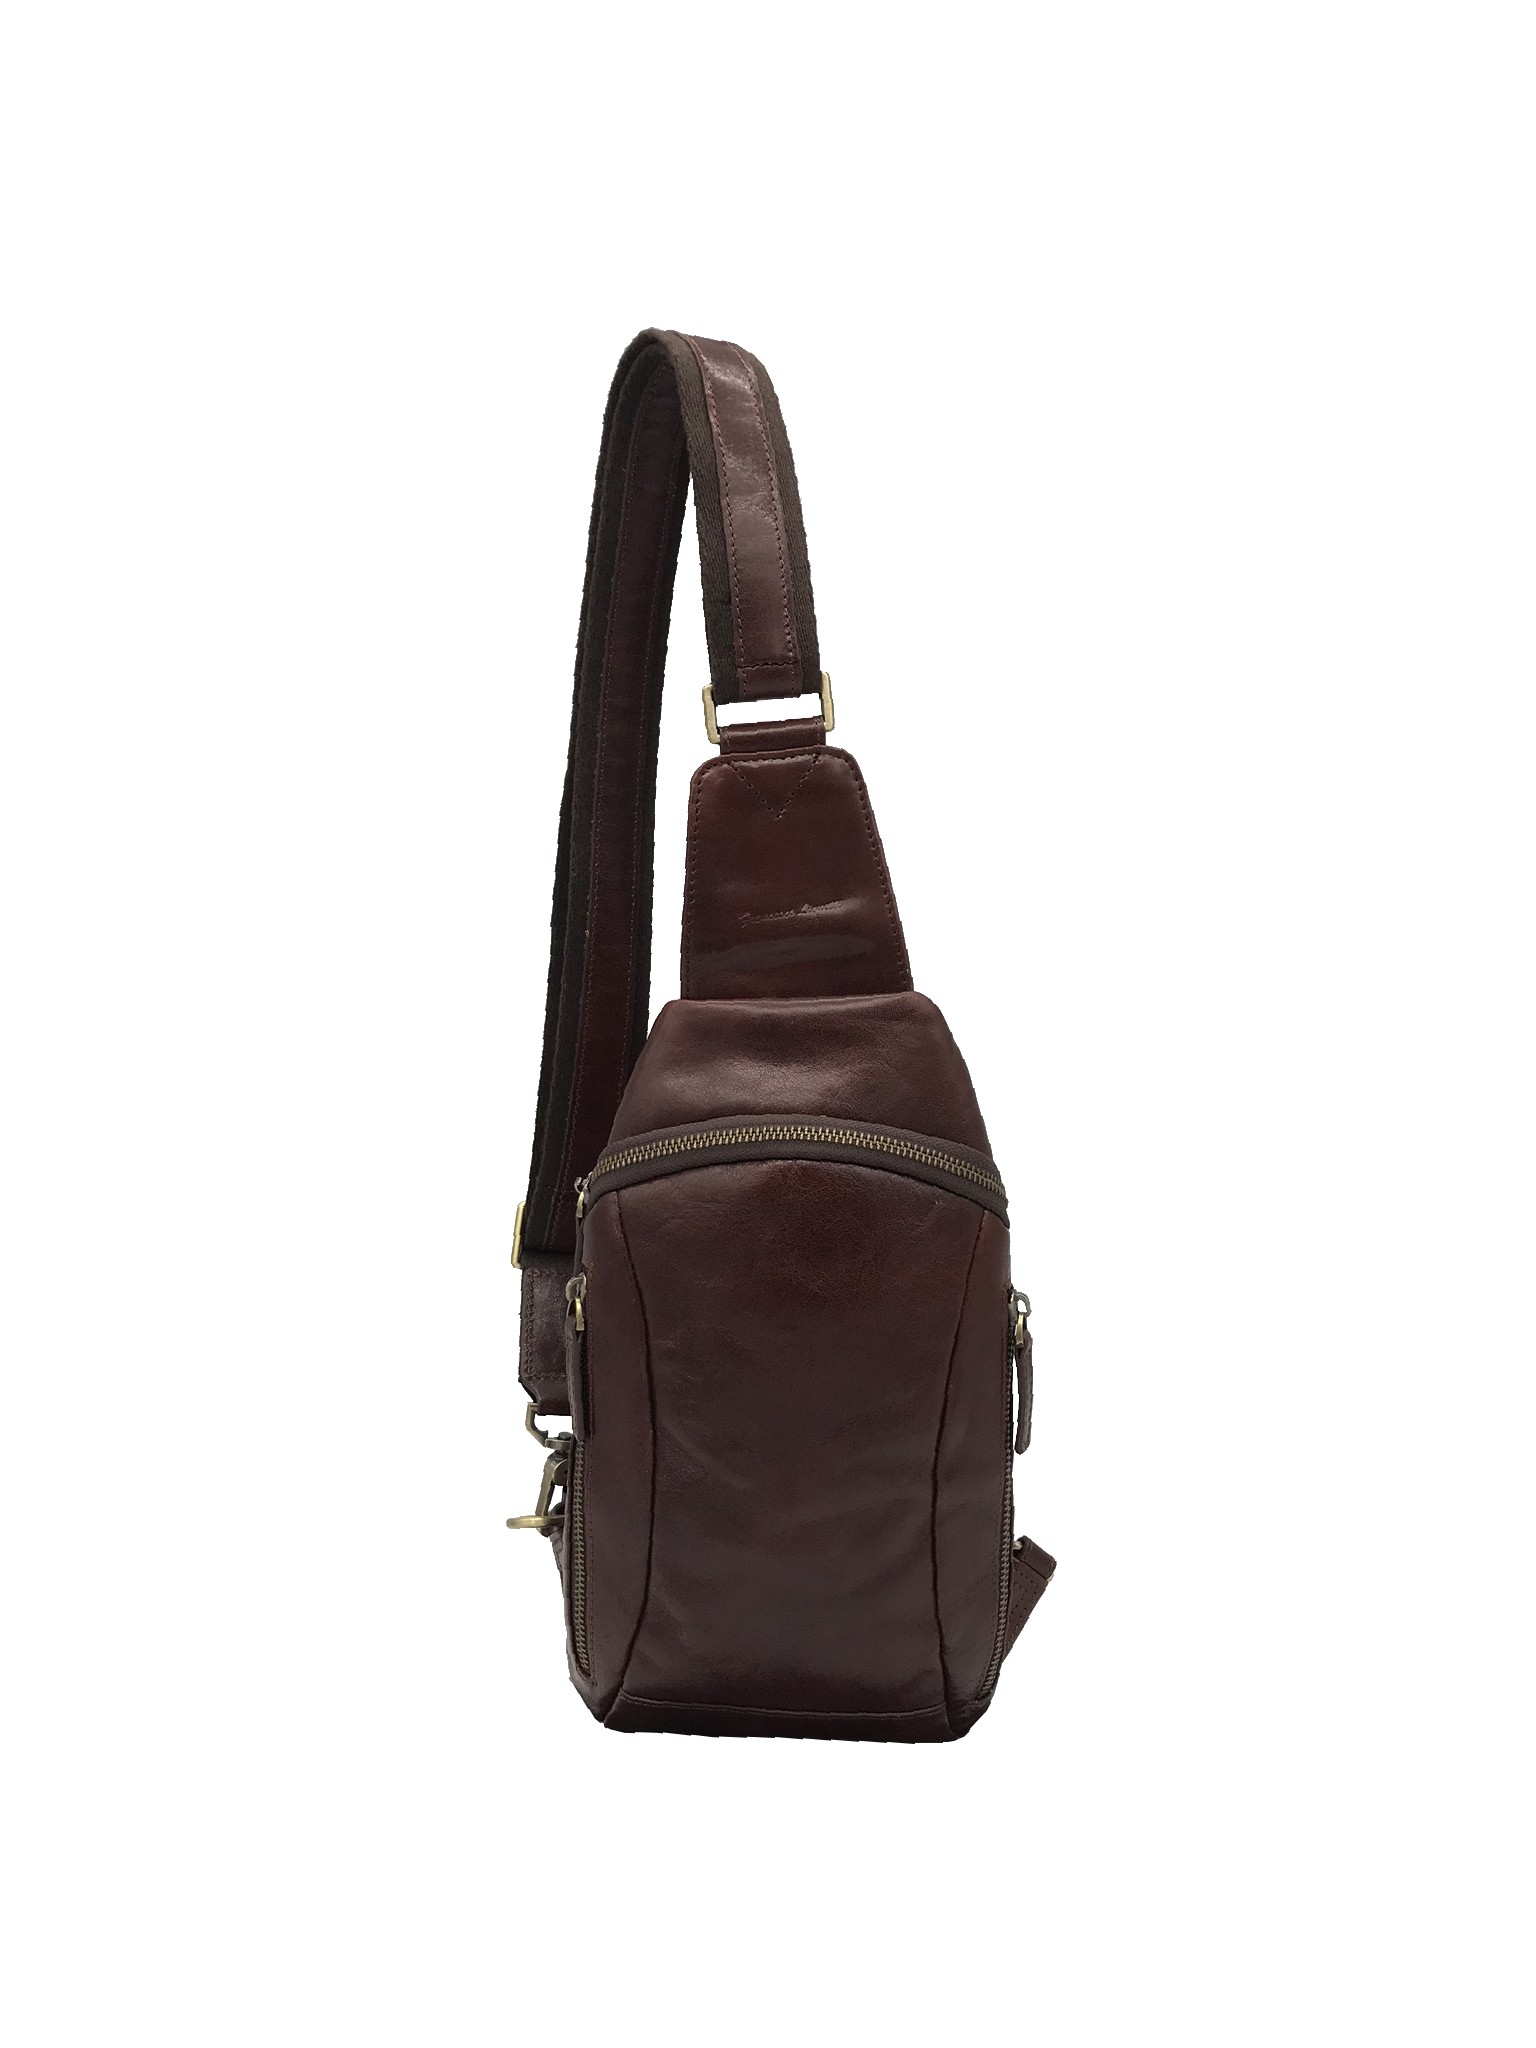 Leather sling bag made in italy with open back pocket